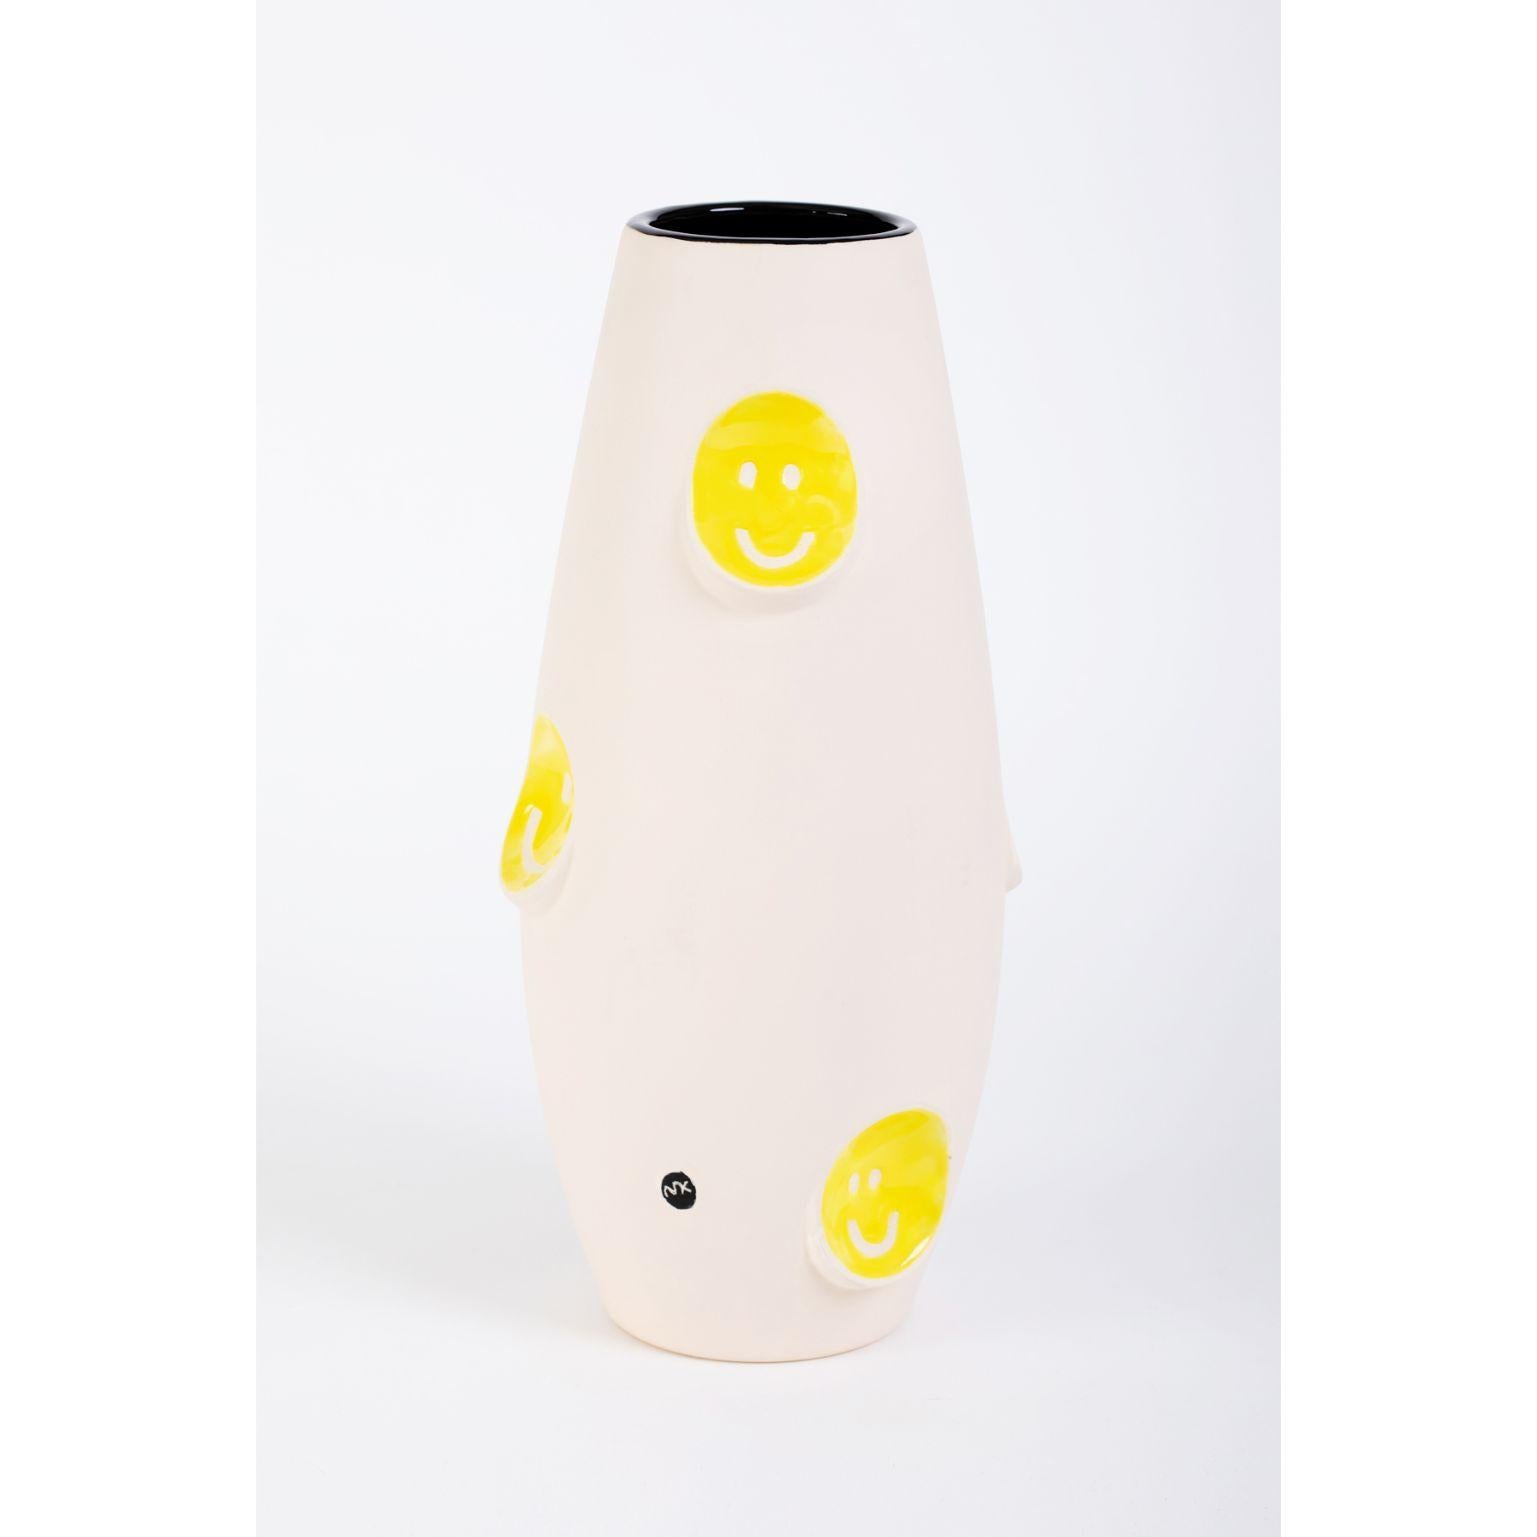 Oko Pop ceramic vase - Smiley by Malwina Konopacka
Unique Sculpture ( Decorated and hand-painted by the artist )
Materials: Impregnated ceramics, glazed interior, sgraffito yellow glaze, overglaze painting
Dimensions: D19, D42 cm

Also